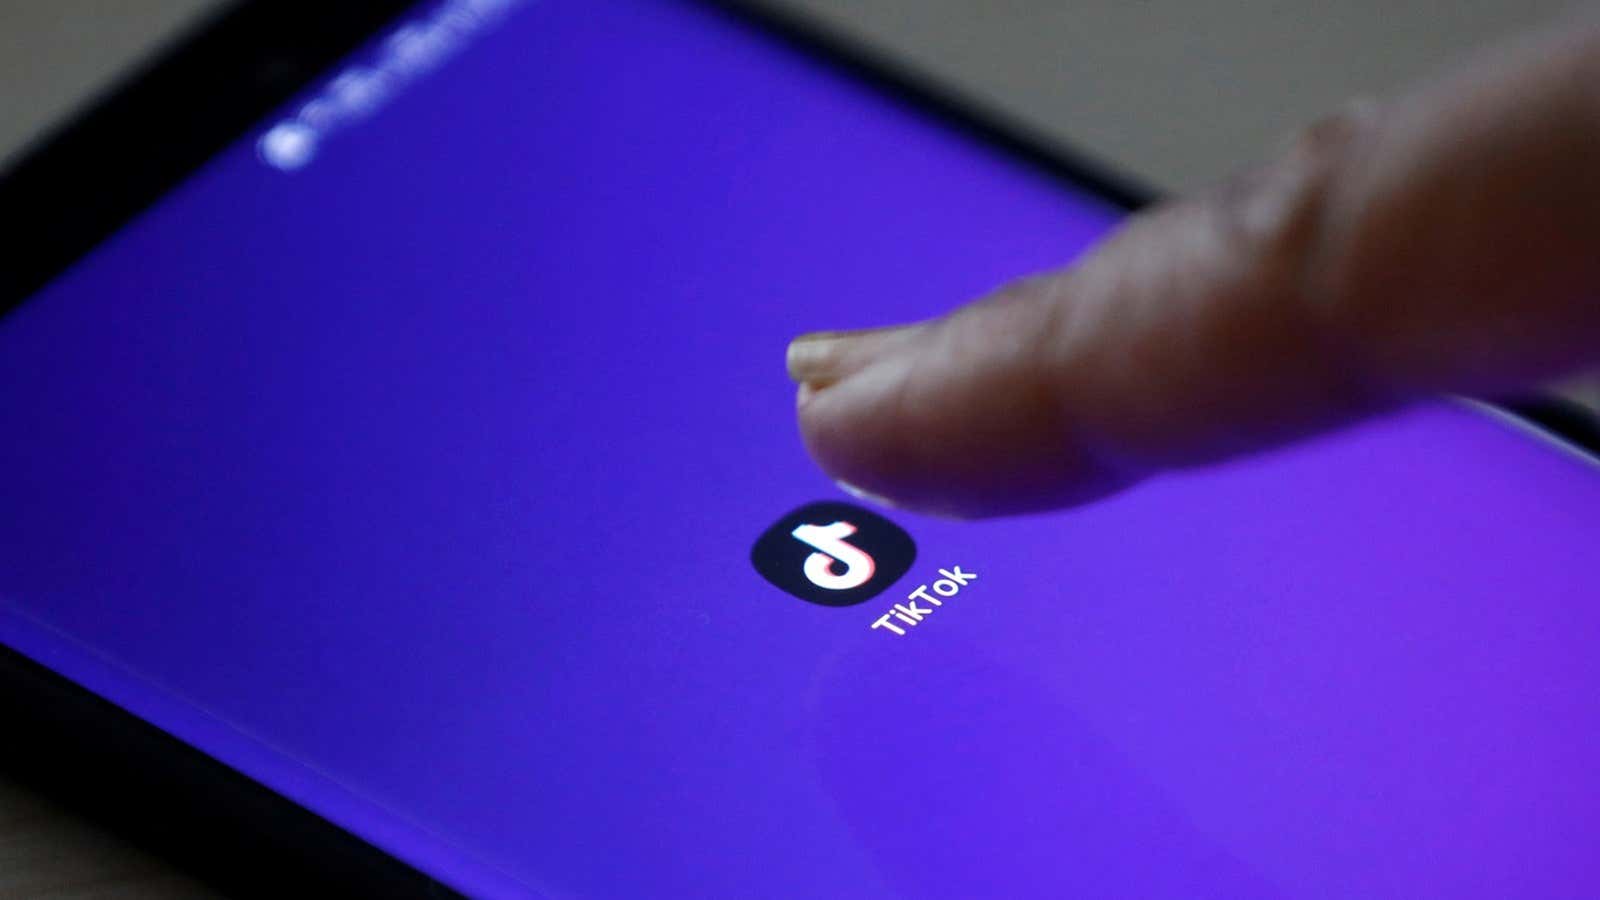 FILE PHOTO: The logo of TikTok application is seen on a mobile phone screen in this picture illustration taken February 21, 2019.